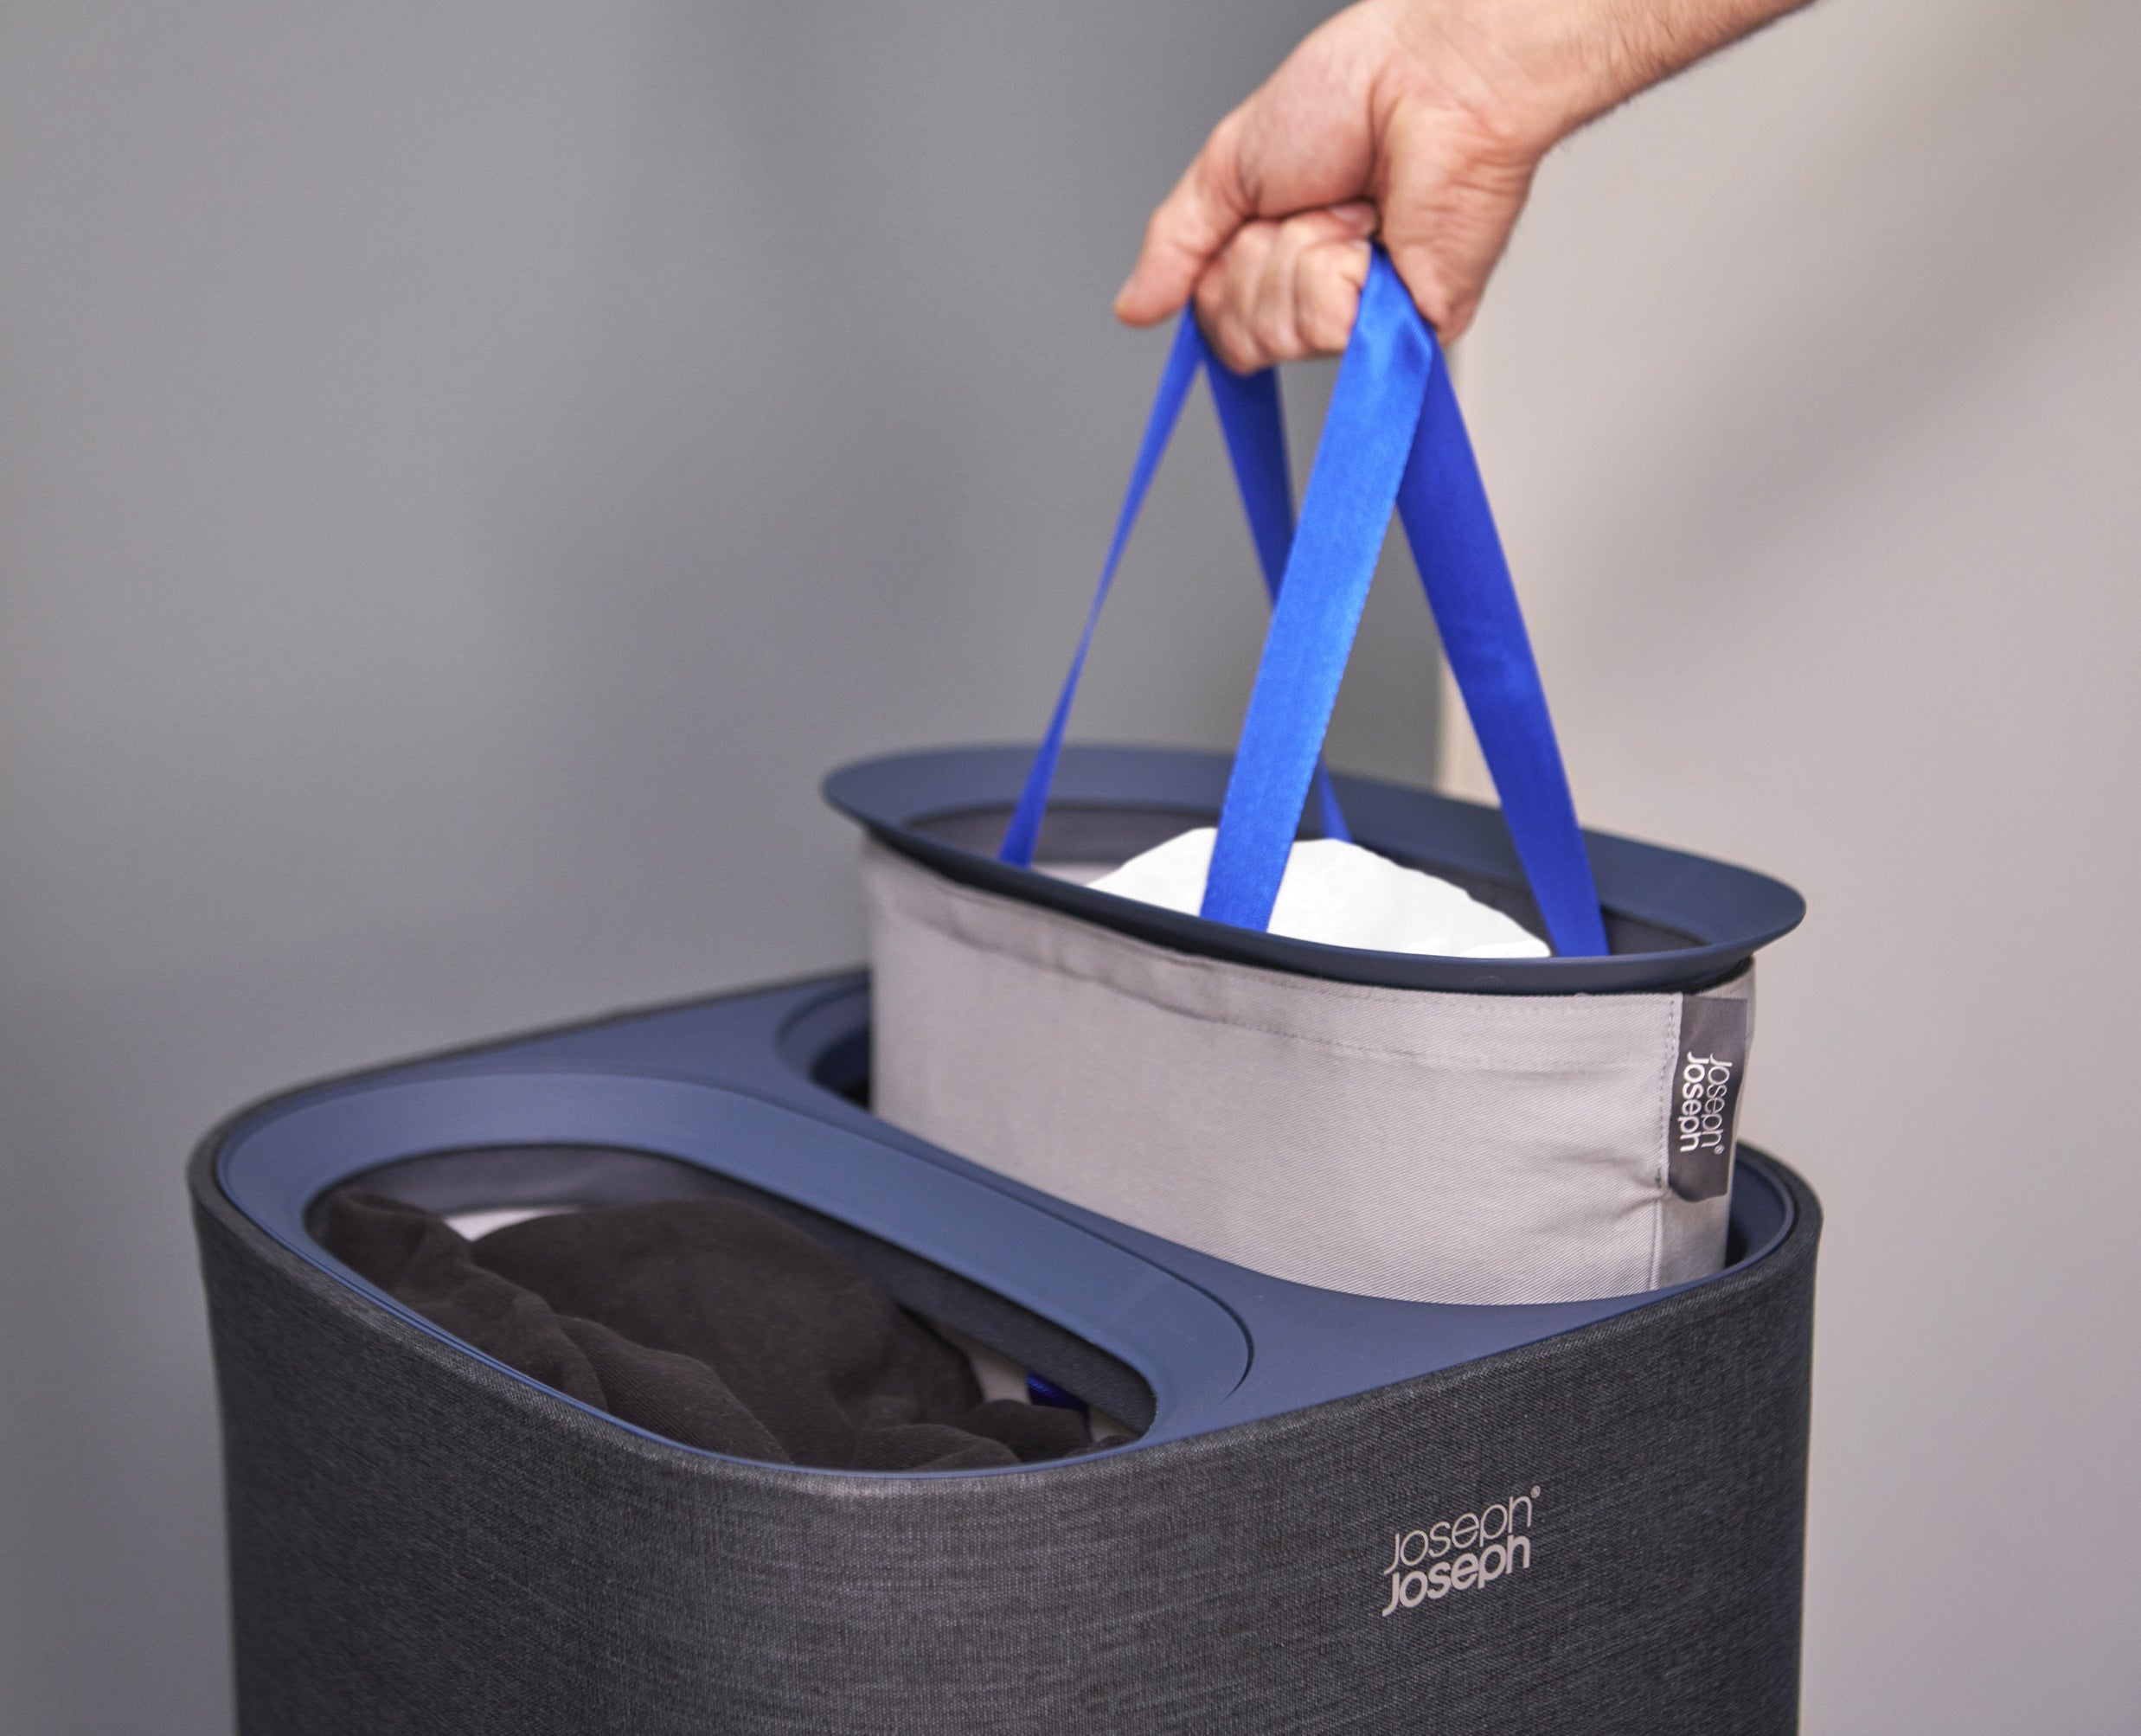 BEON.COM.AU Product Details Make wash day less of a chore by separating your light and dark/coloured fabrics as you go with the dual compartments of this stylish laundry basket.  Dual 30-litre compartments for easy separation of fabrics Removable tote bags with easy-carry handles Helper handle on base of bag... Joseph Joseph at BEON.COM.AU